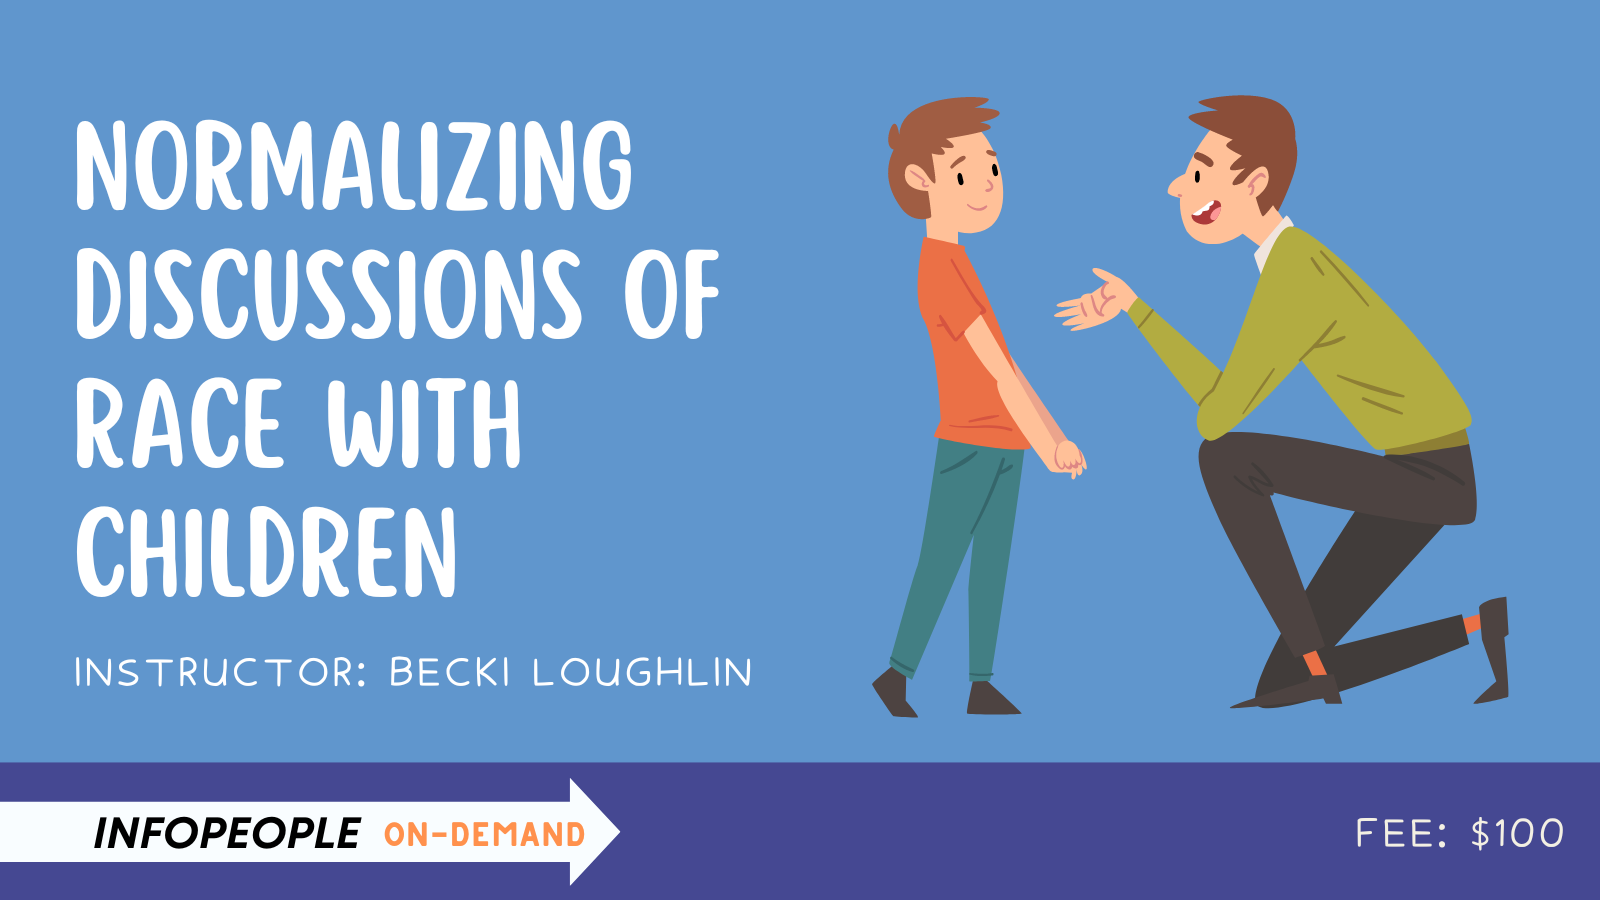 Normalizing Discussions of Race with Children, an Infopeople On-Demand course. Instructor: Becki Loughlin. Fee: $100. A man kneels to talk to a young boy.